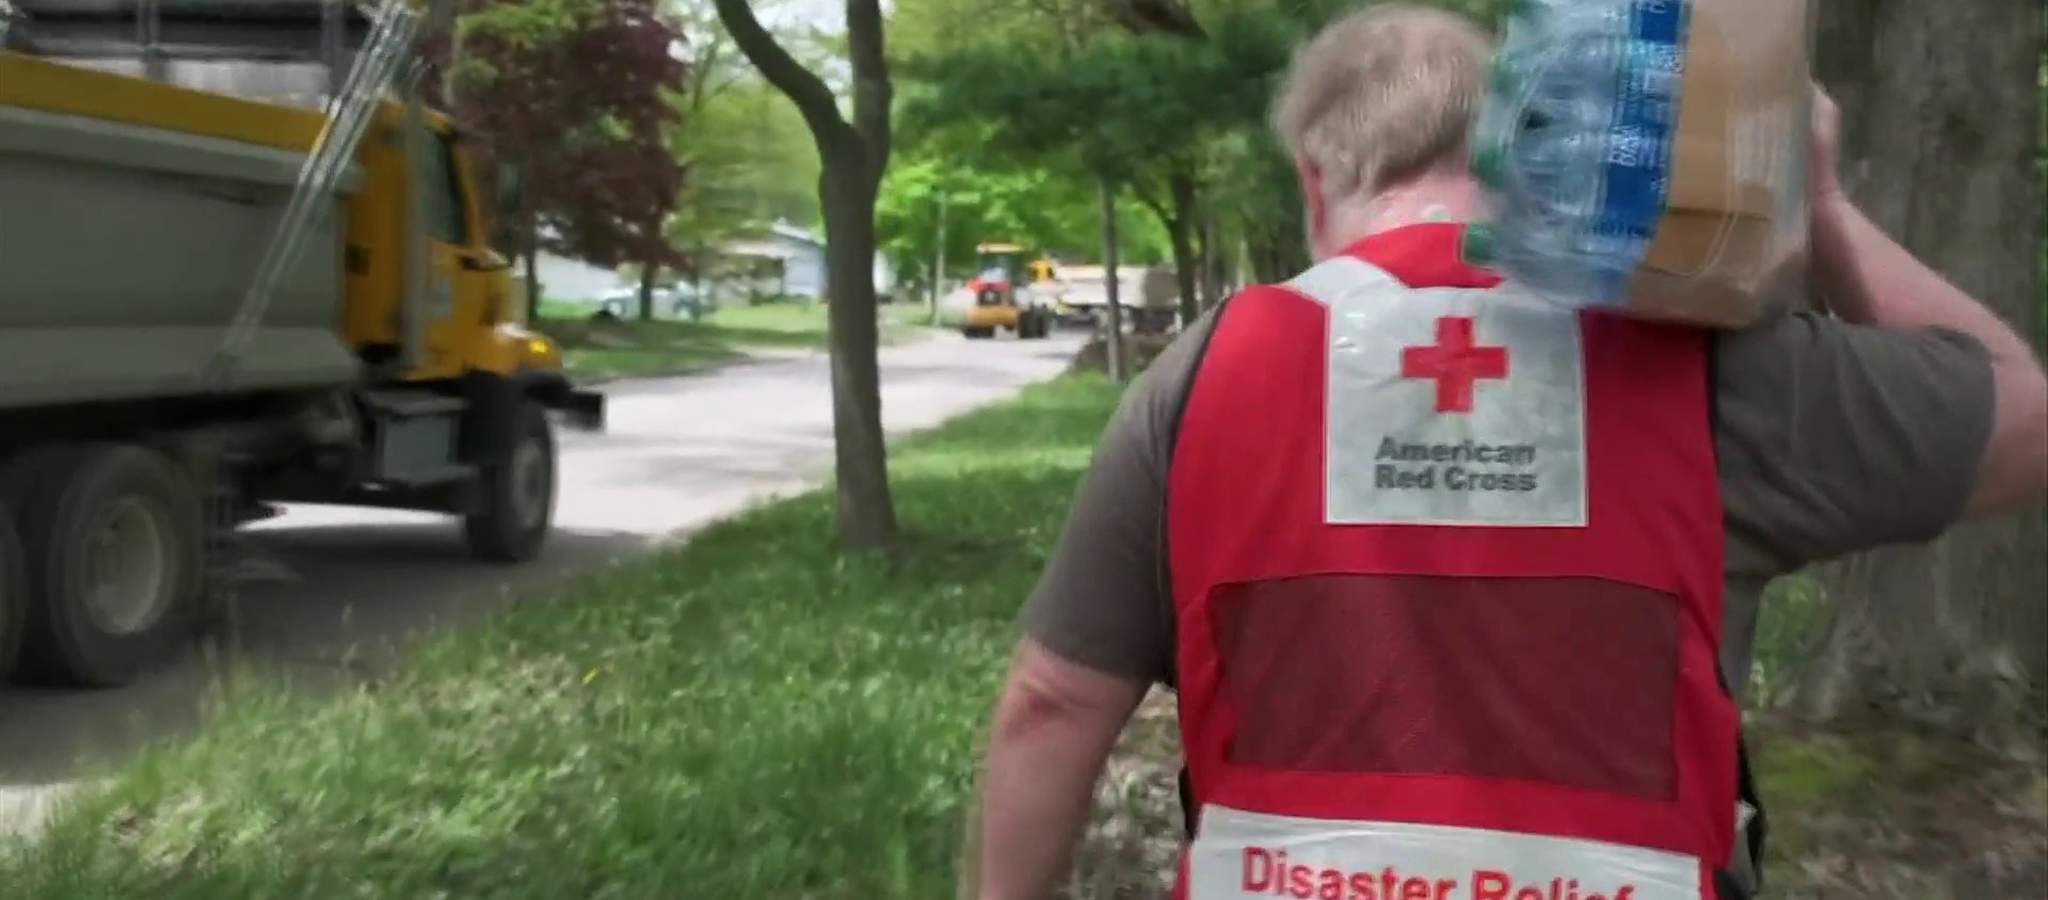 American Red Cross asking for donations for annual Giving Day